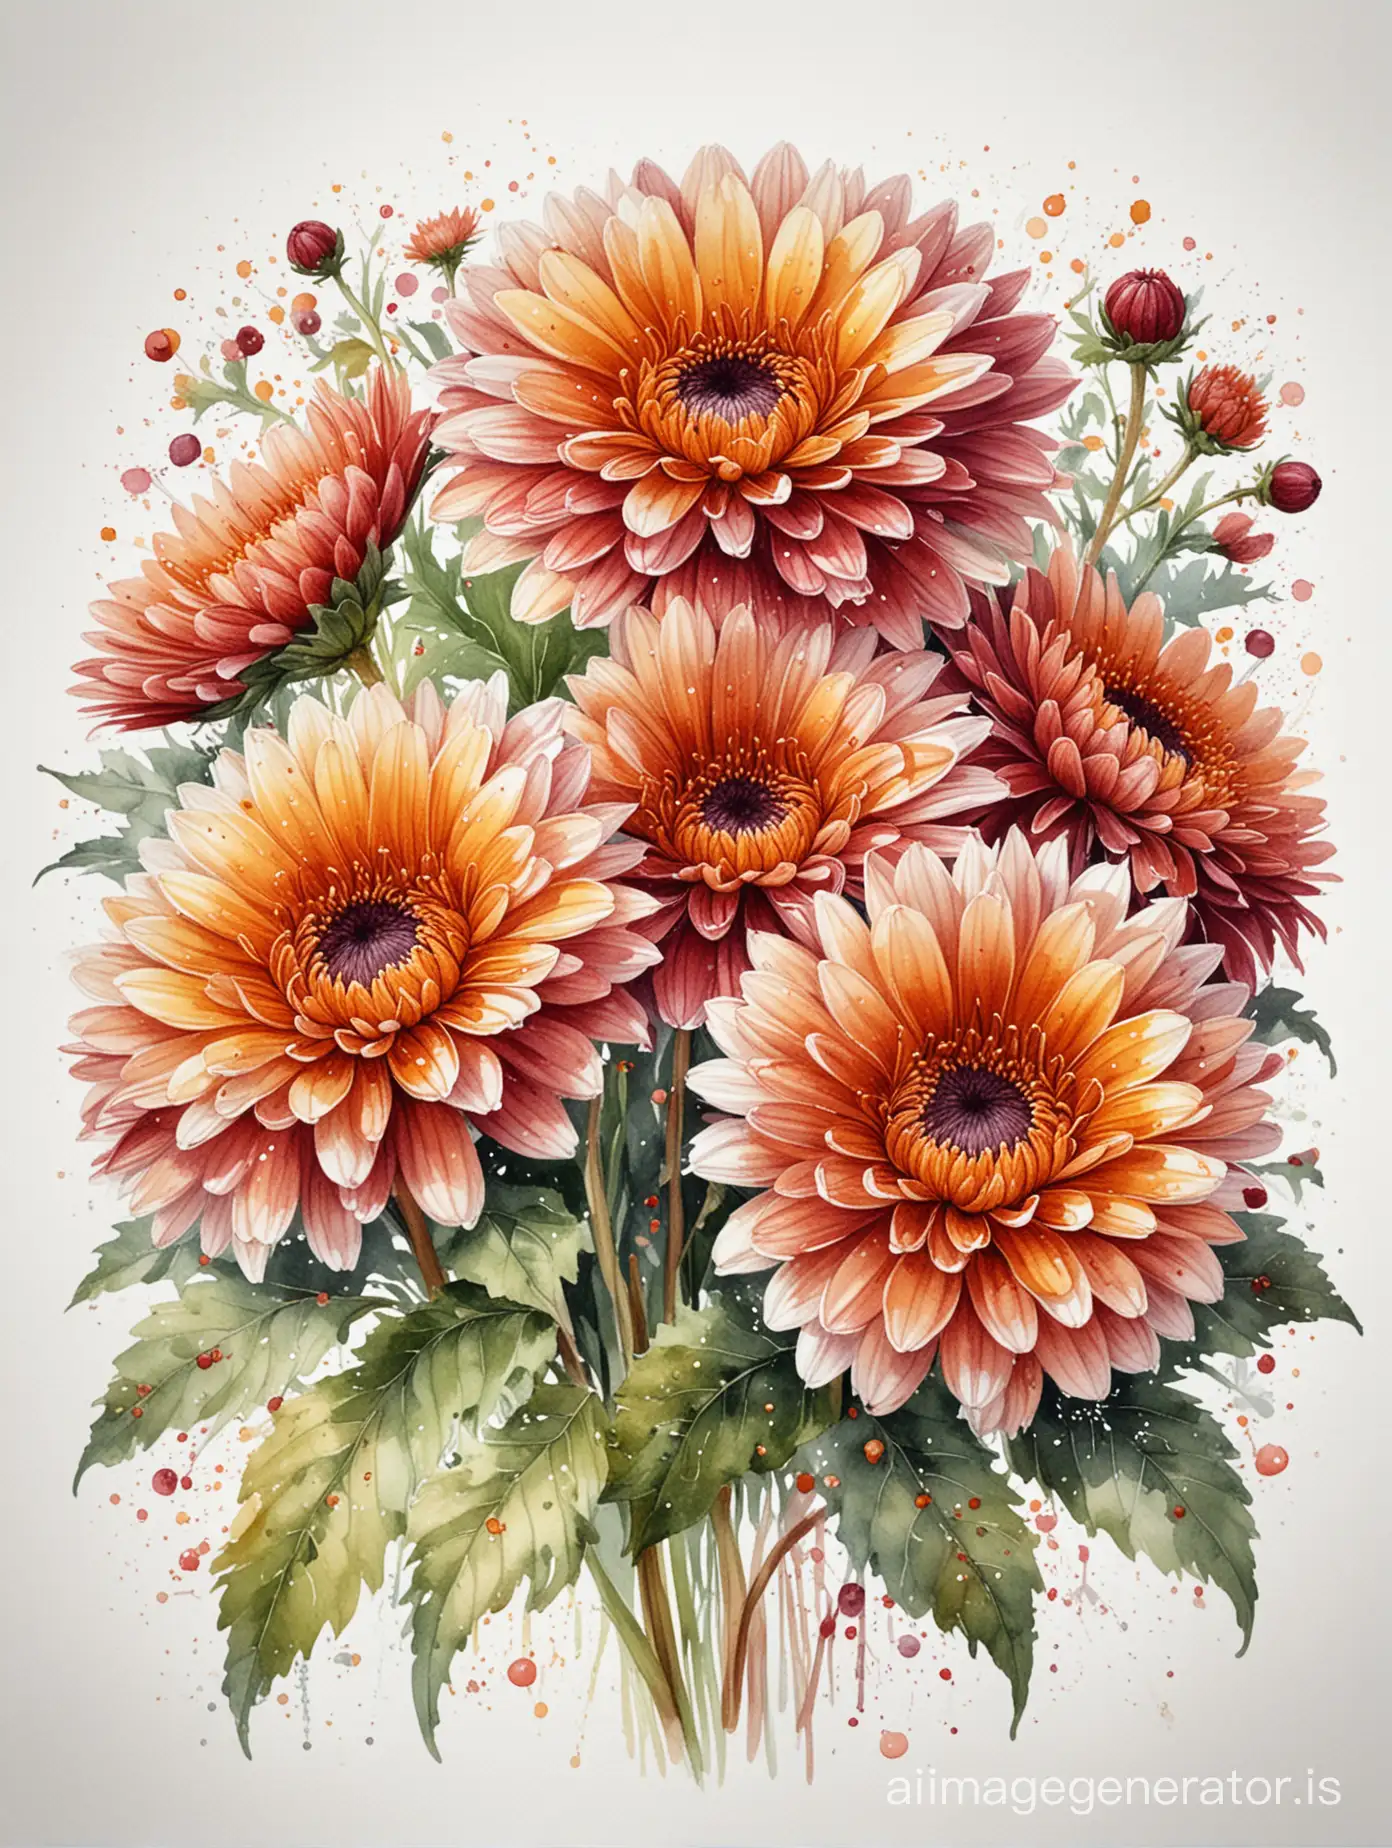 Watercolour. A gorgeous bouquet of burgundy and orange terry chrysanthemums with a white border around the edges of the petals with transparent dew drops on the petals and leaves. Drawing on a white background